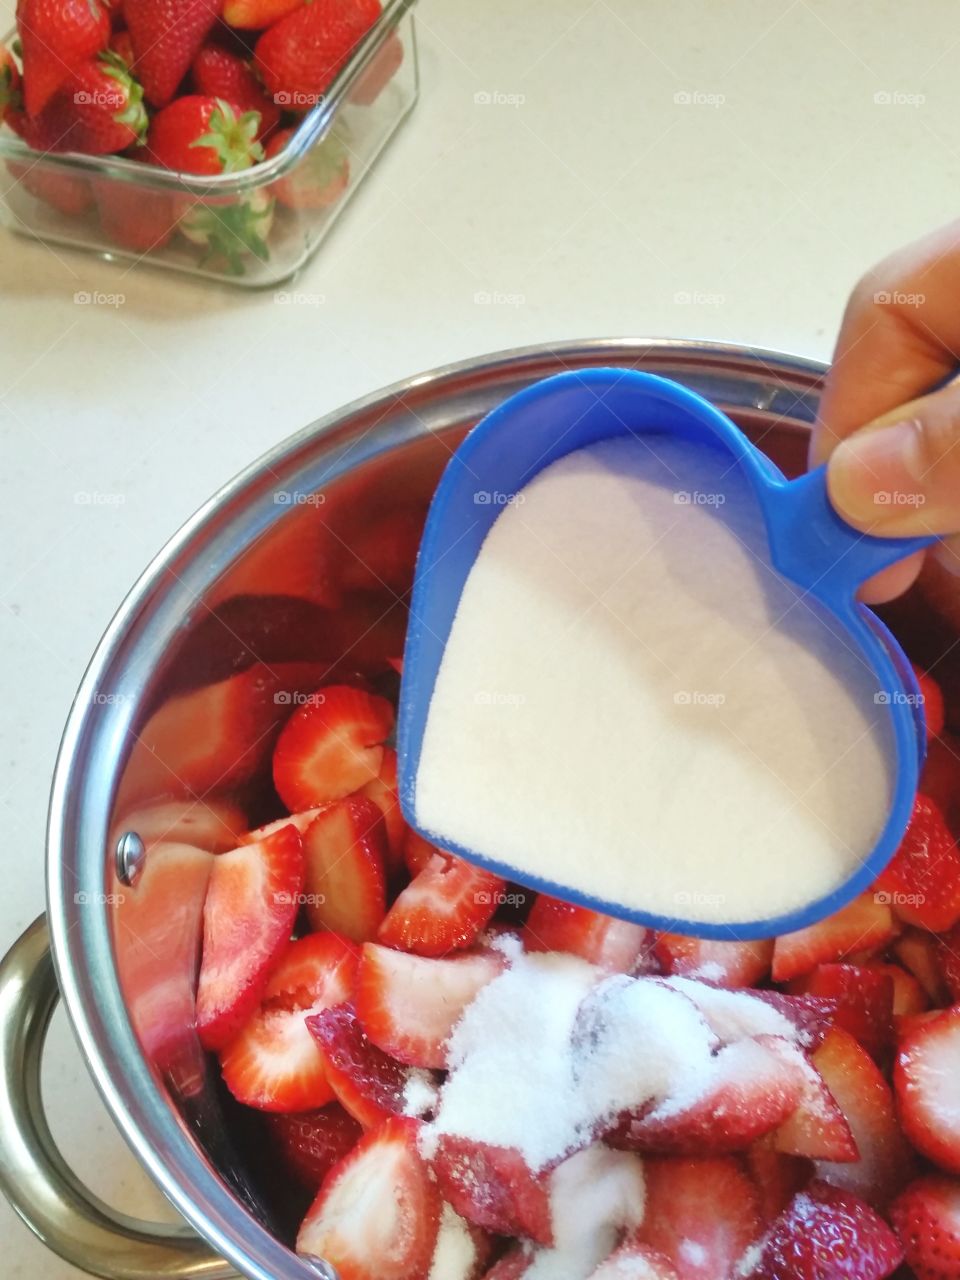 Measuring sugar for strawberry preserves with bowl of strawberries in background